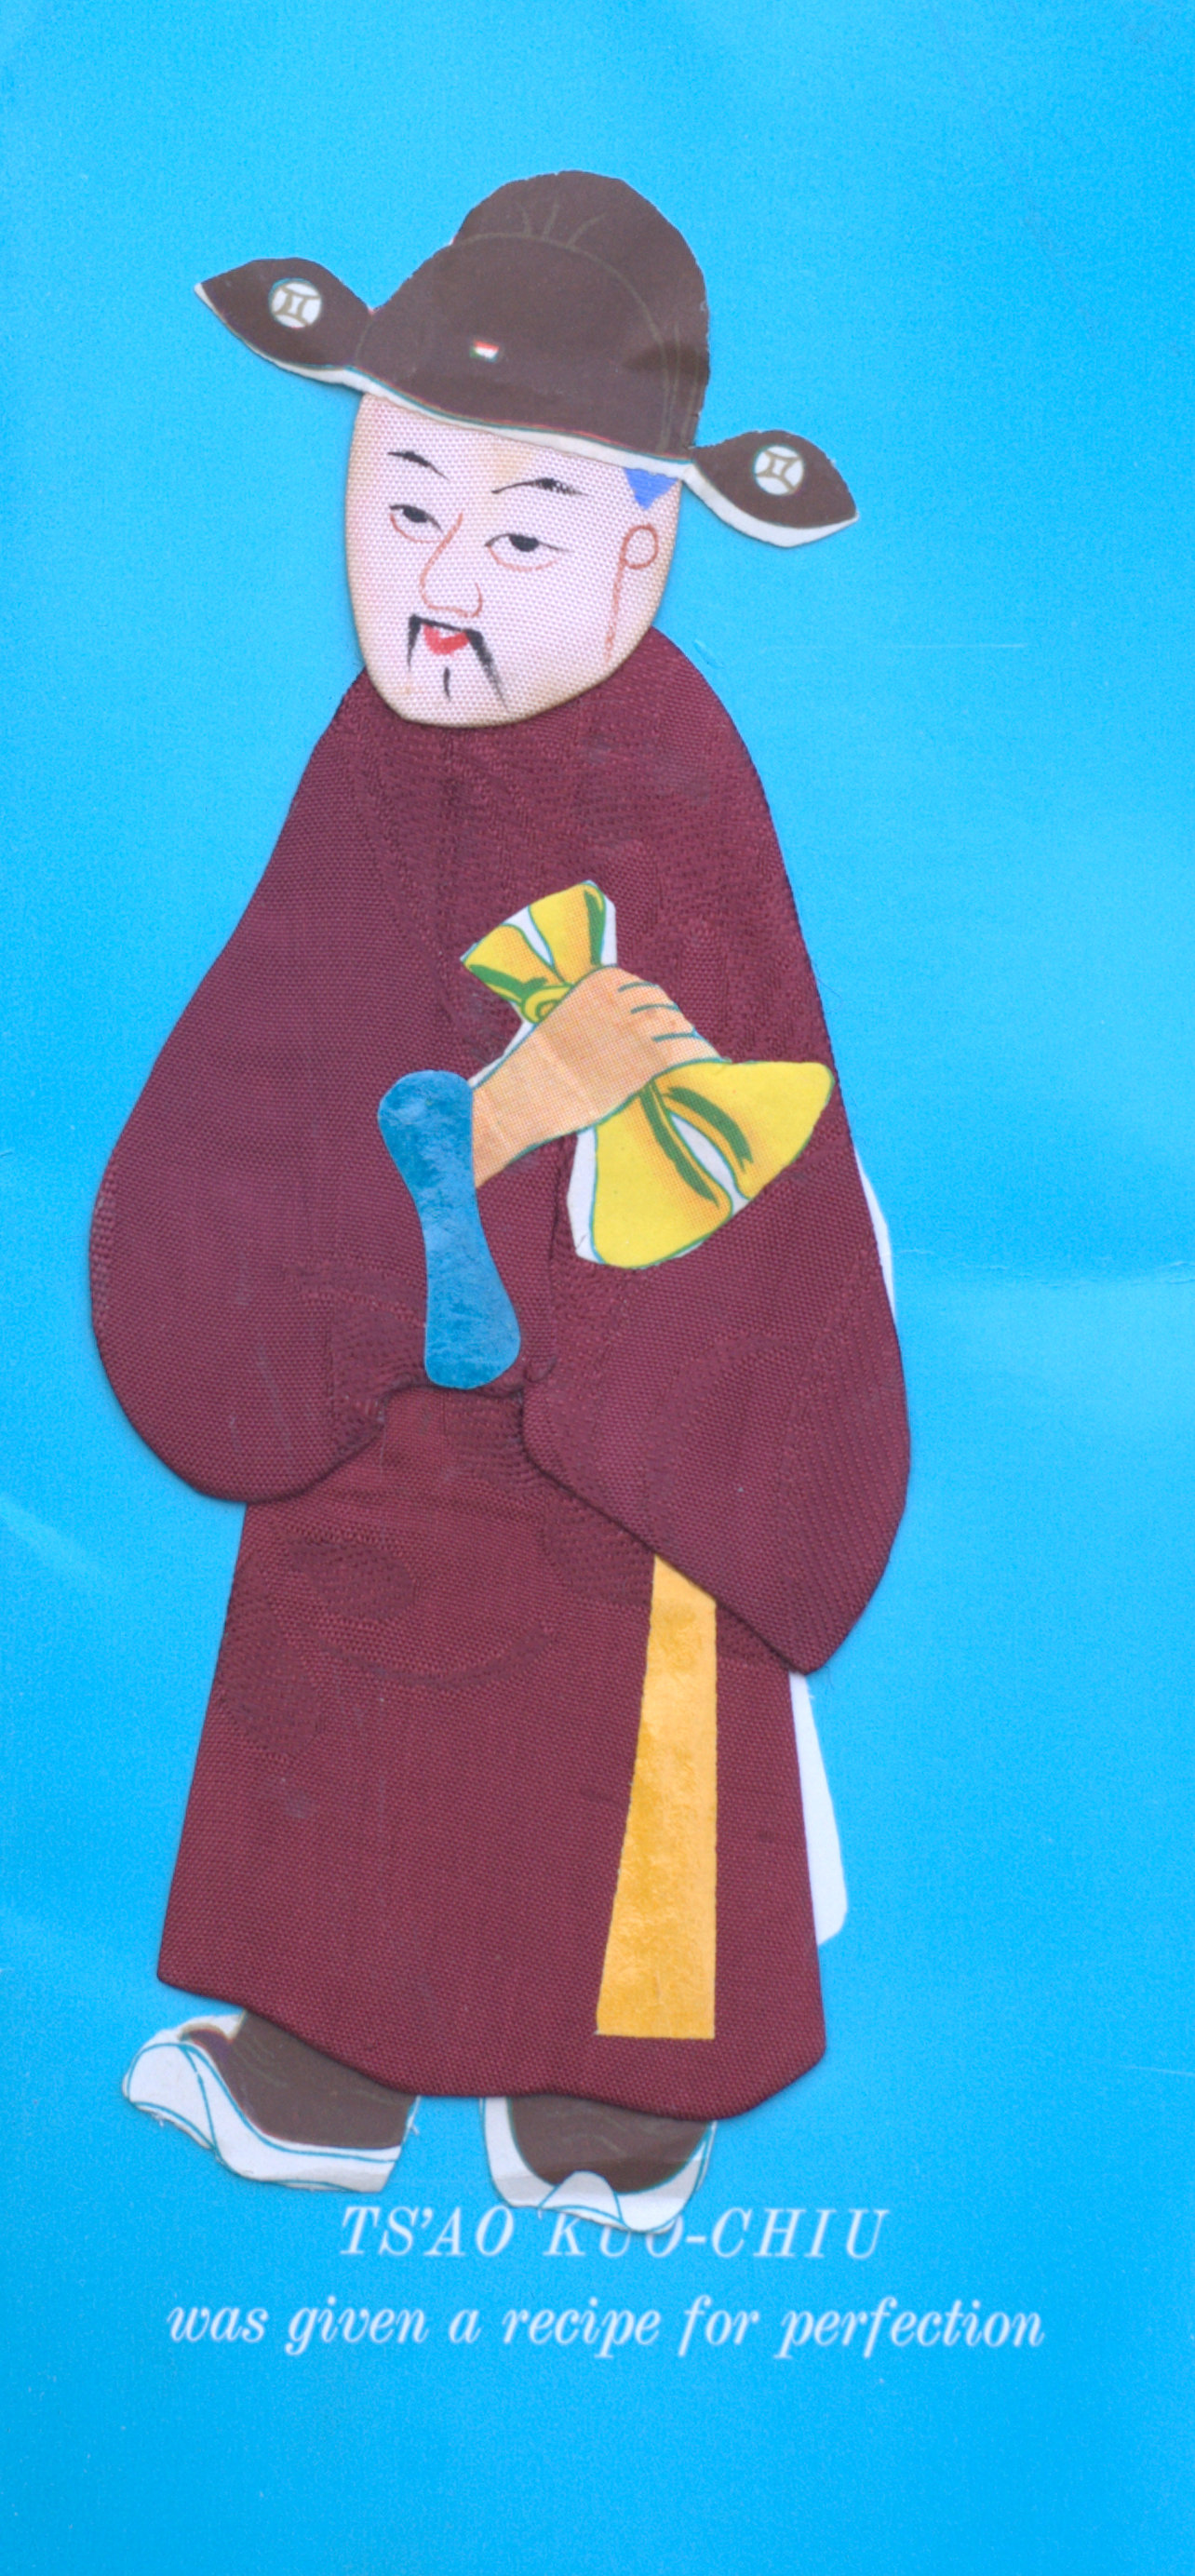 paper and fabric depiction of Ts’ao Kuo-chiu